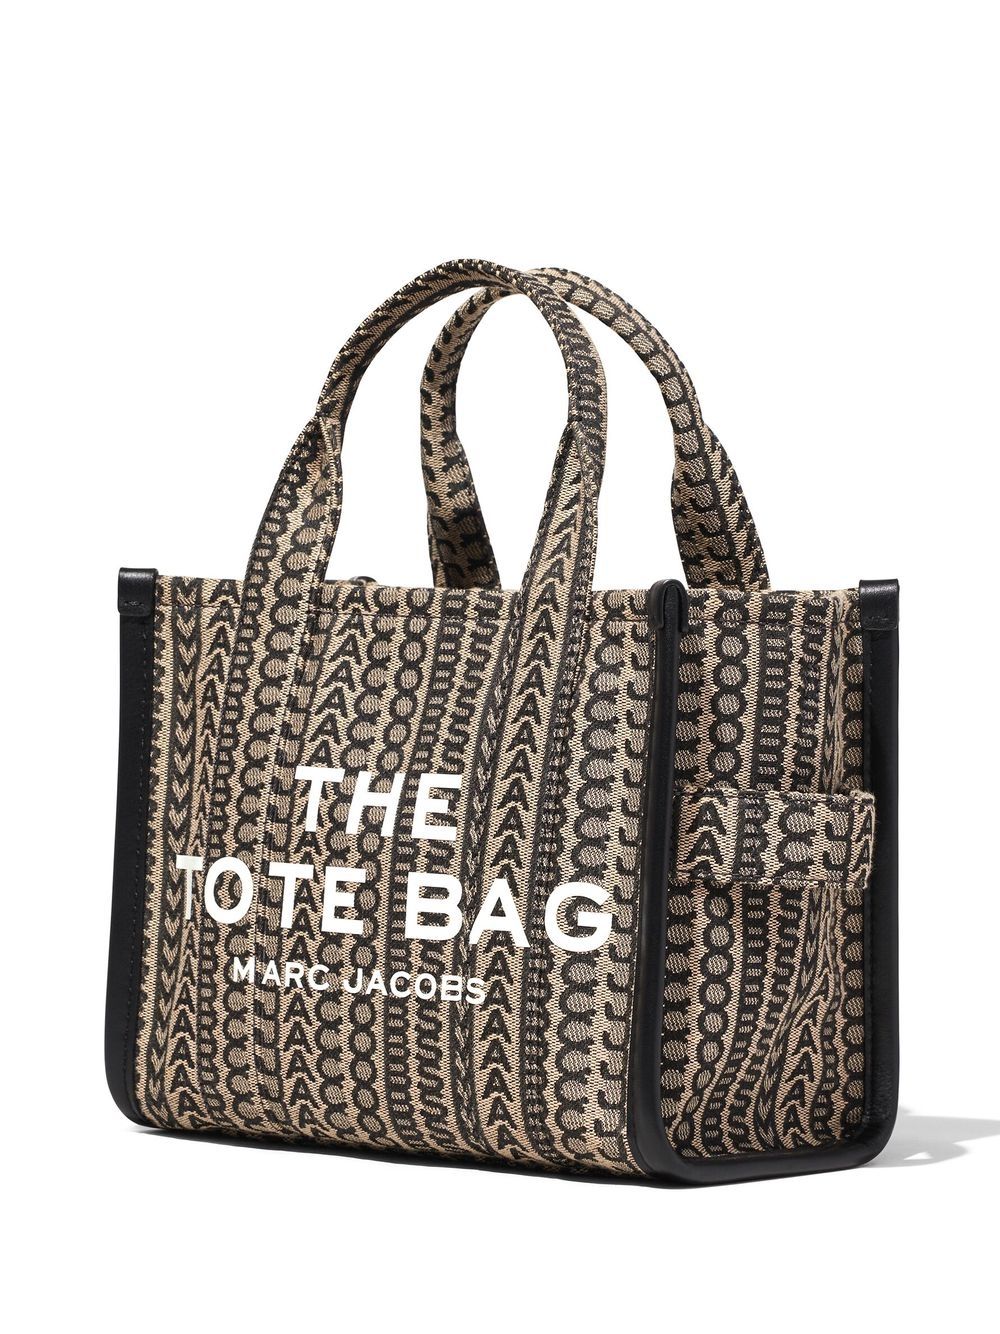 The Monogram Small Tote bag<BR/><BR/><BR/>